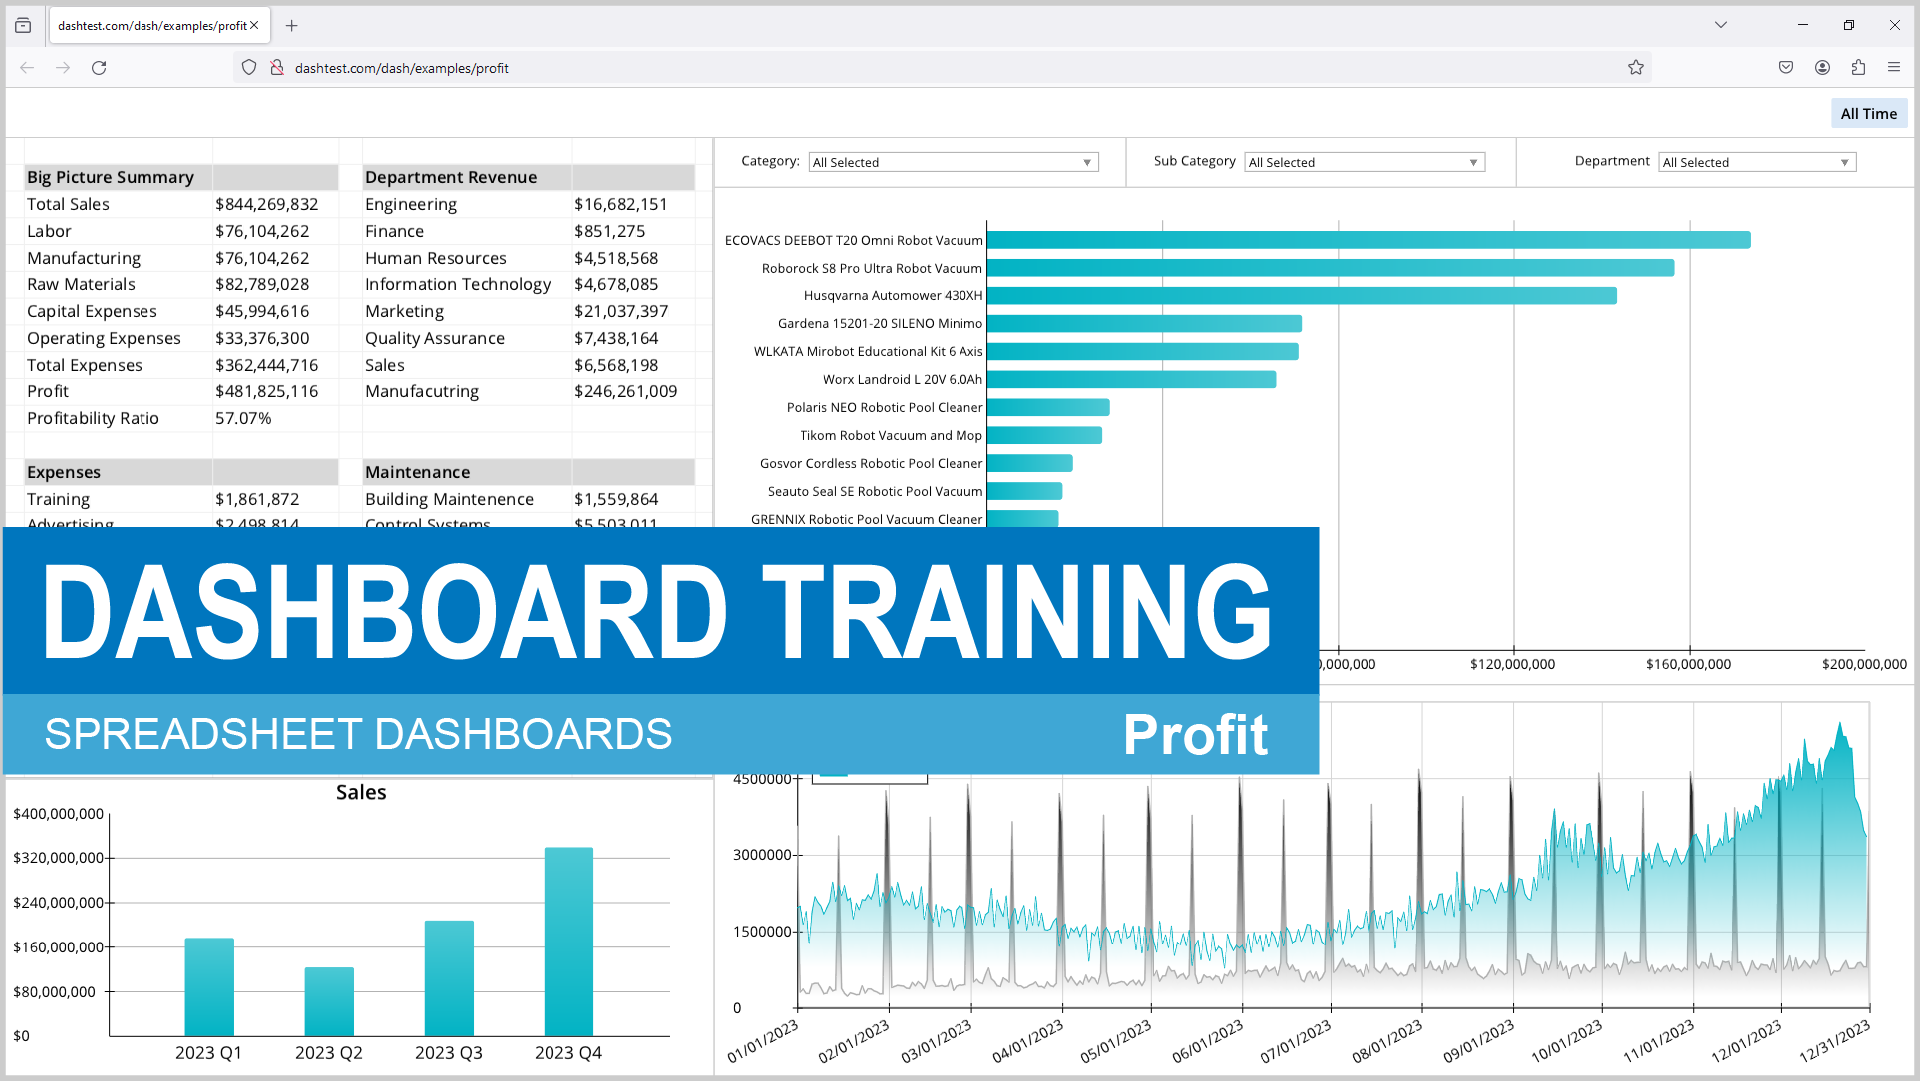 A screenshot of a dashboard training program, featuring a spreadsheet displaying various data points and graphs.